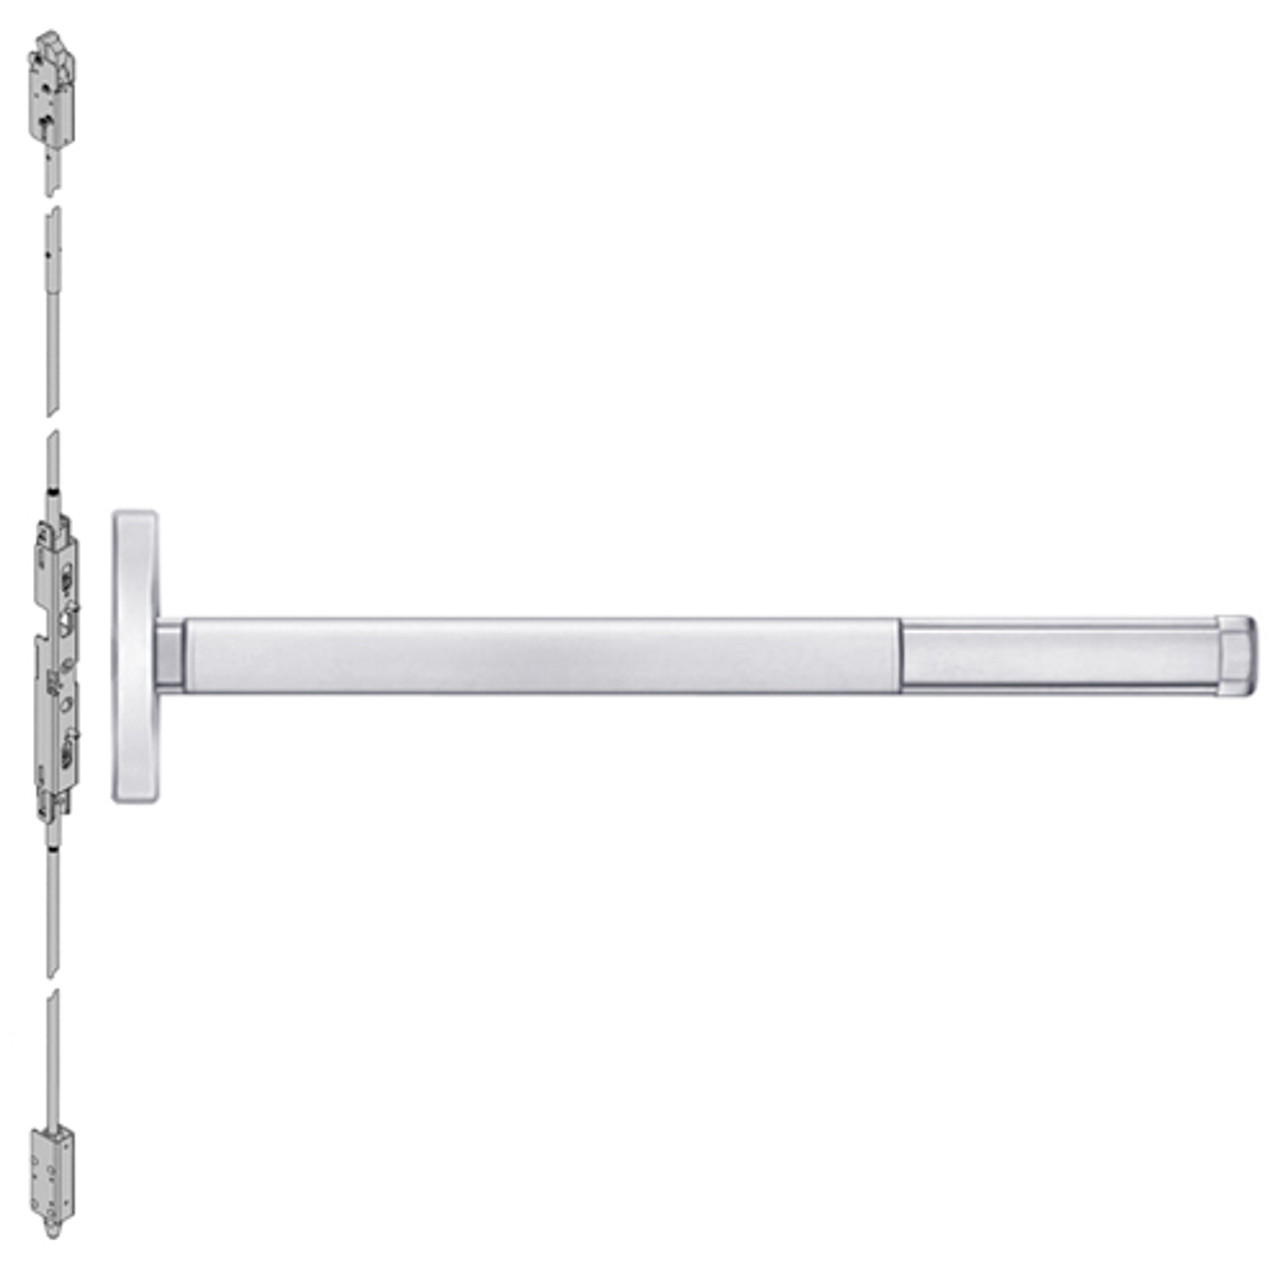 DE2614LBR-625-36 PHI 2600 Series Concealed Vertical Rod Exit Device with Delayed Egress Prepped for Lever Always Active in Bright Chrome Finish